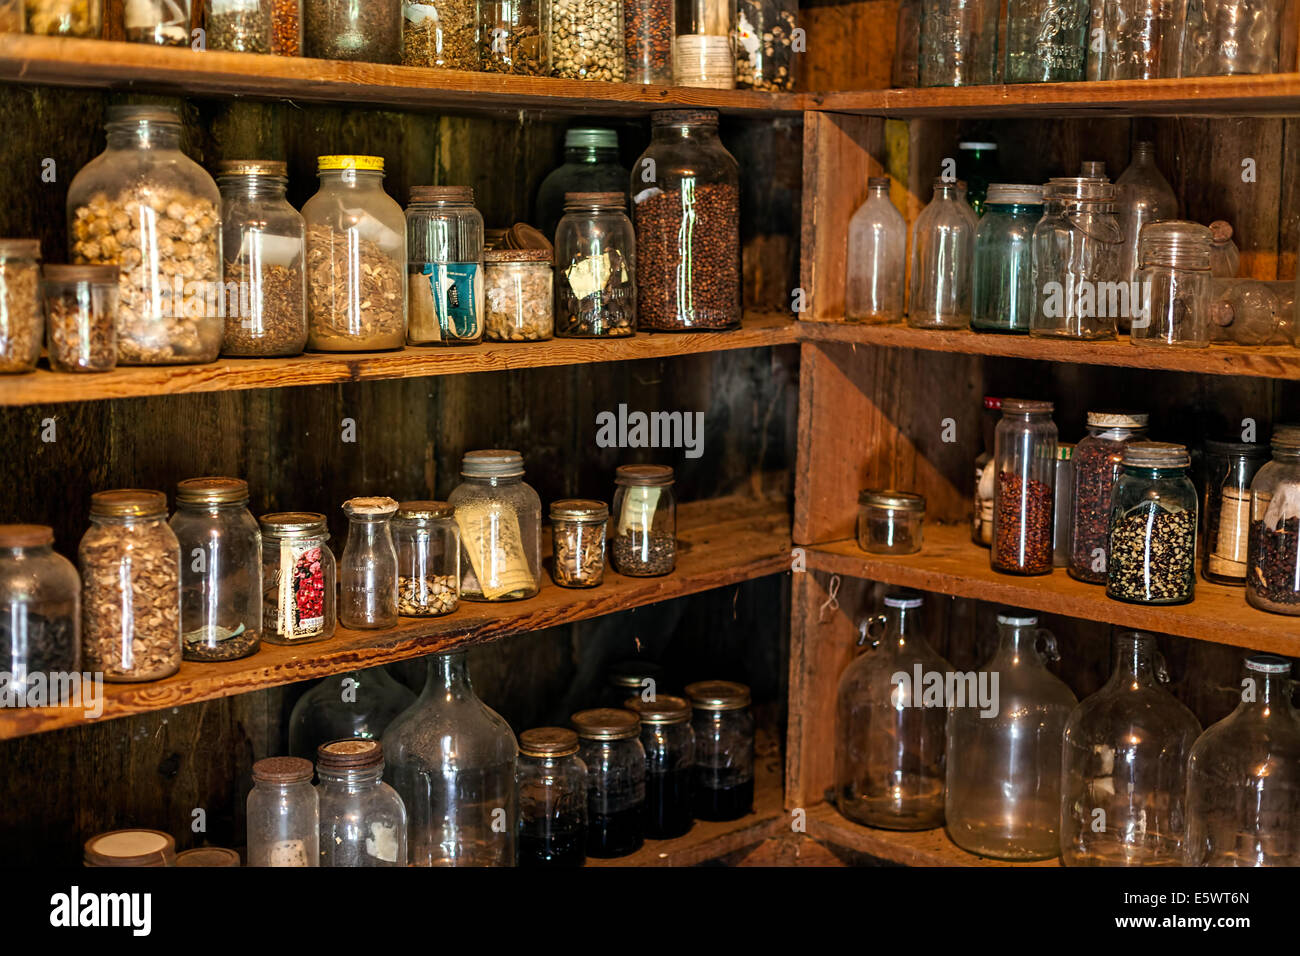 https://c8.alamy.com/comp/E5WT6N/old-jars-and-bottles-of-herbs-beans-and-condiments-on-wooden-pantry-E5WT6N.jpg